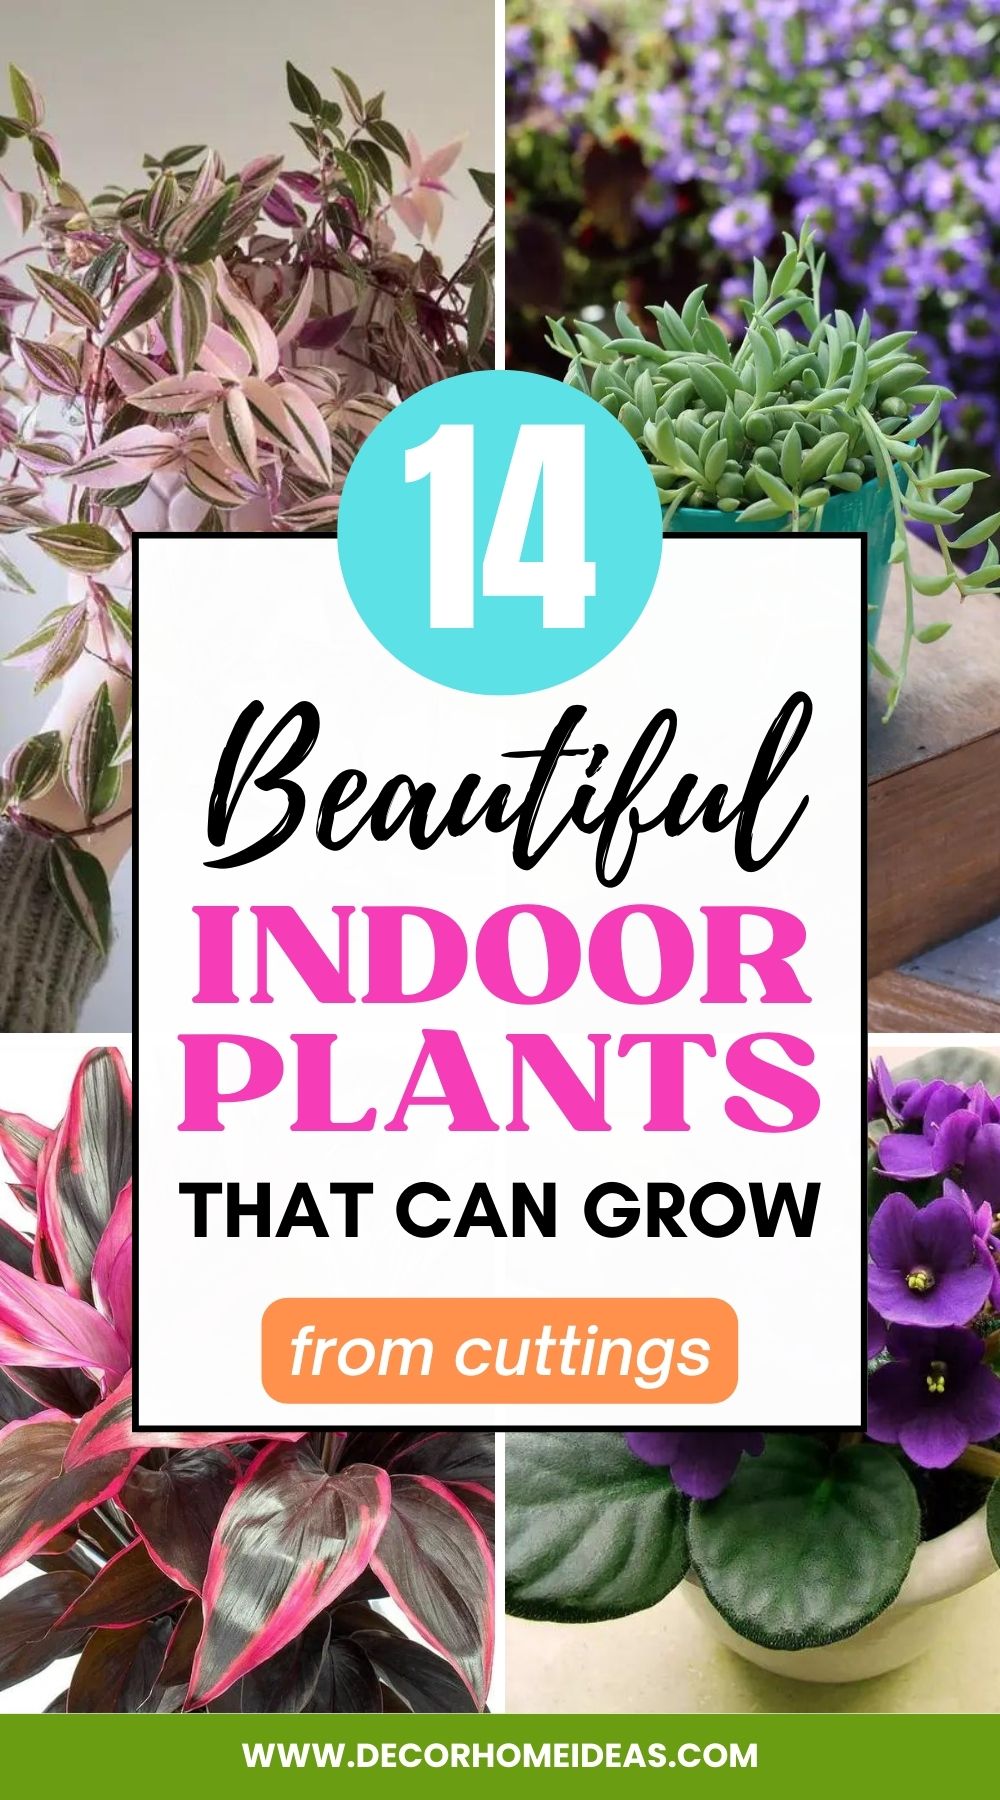 Grow your own indoor plants from cuttings! Learn about 30 different indoor plants that can be propagated from cuttings for a unique, easy-to-care-for home garden.